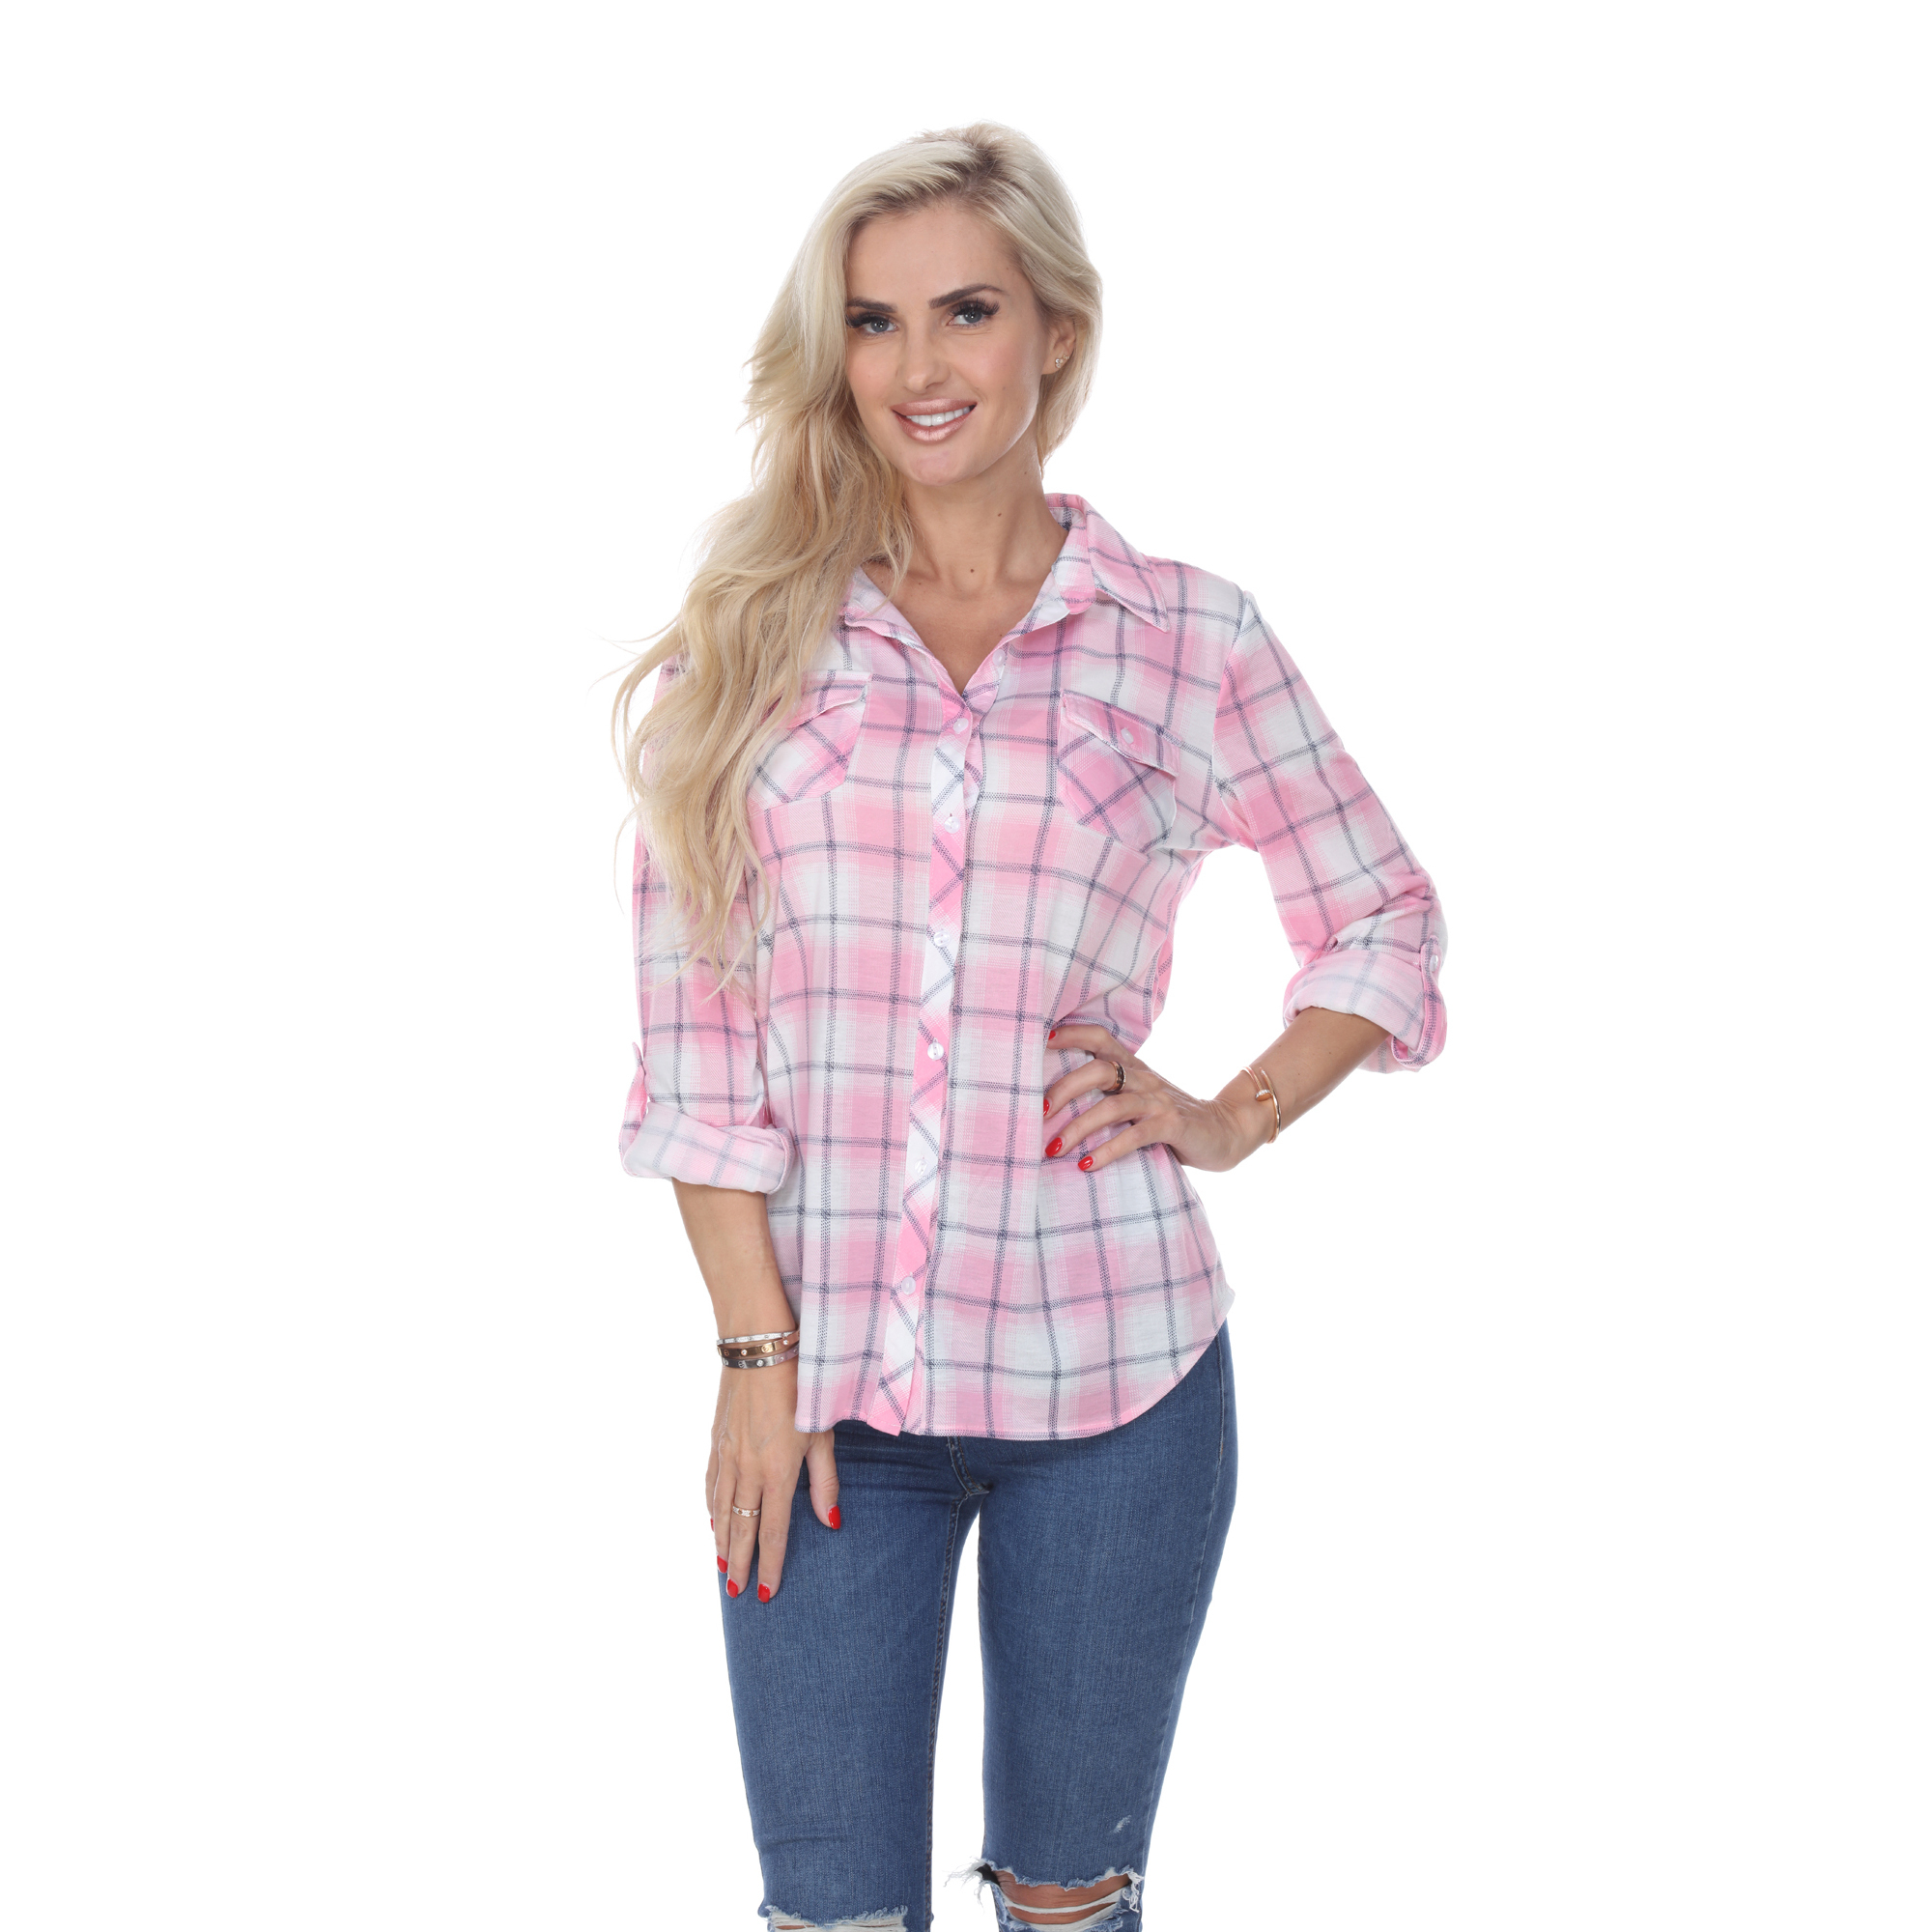 White Mark Women's Stretchy Plaid Flannel Shirt - Red/Black, X-Large